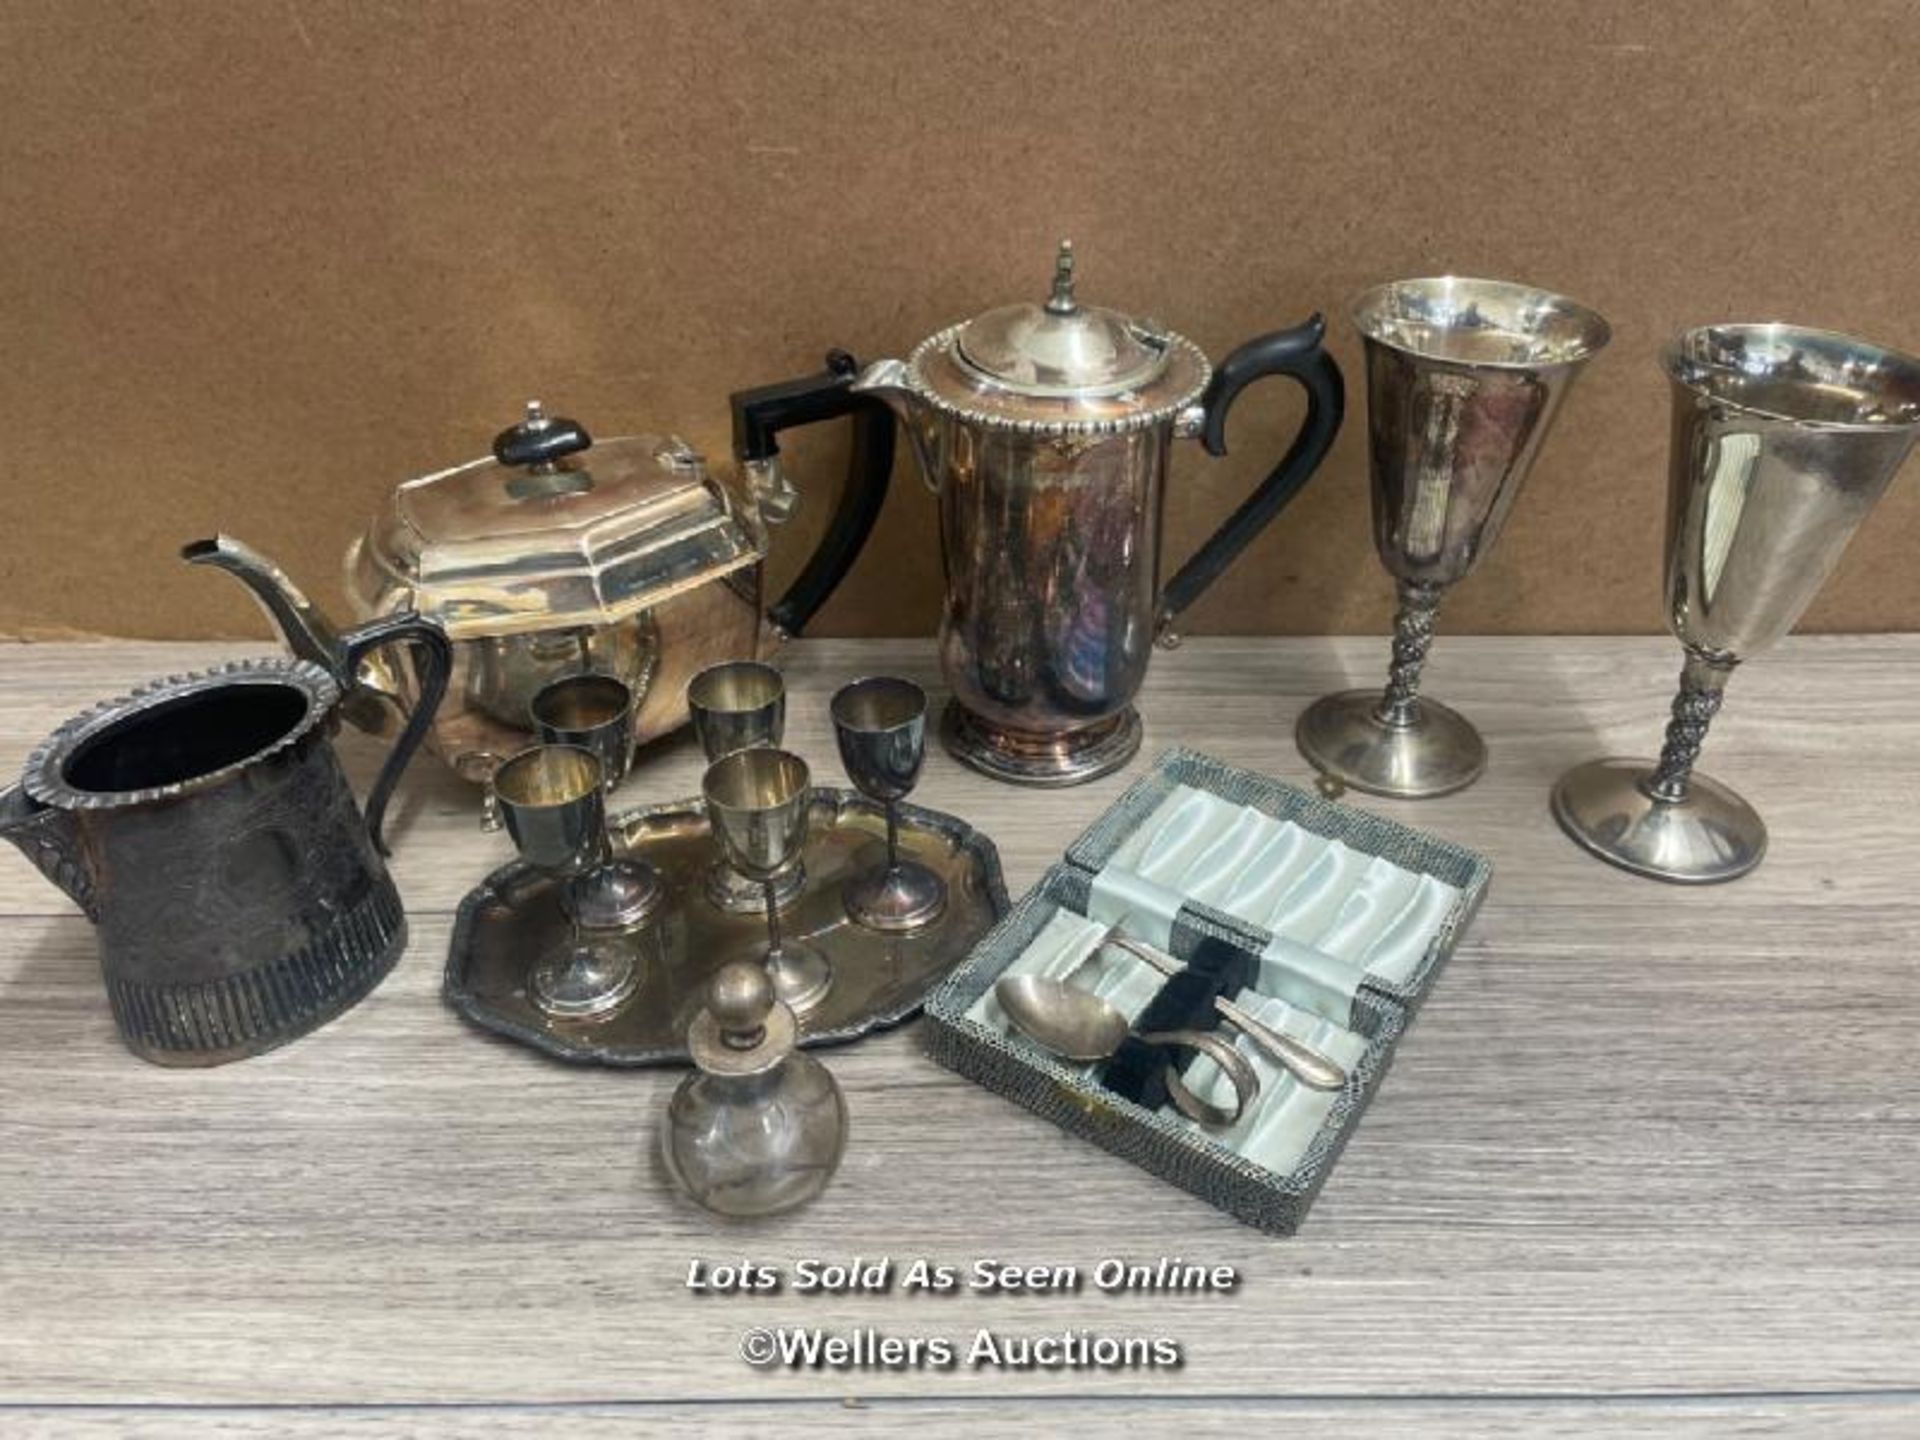 PLATED METAL WARE INCLUDING GOBLETS, BABY SPOON SET, PERFUM BOTTLE, SHERRY GOBLETS AND TEA POT